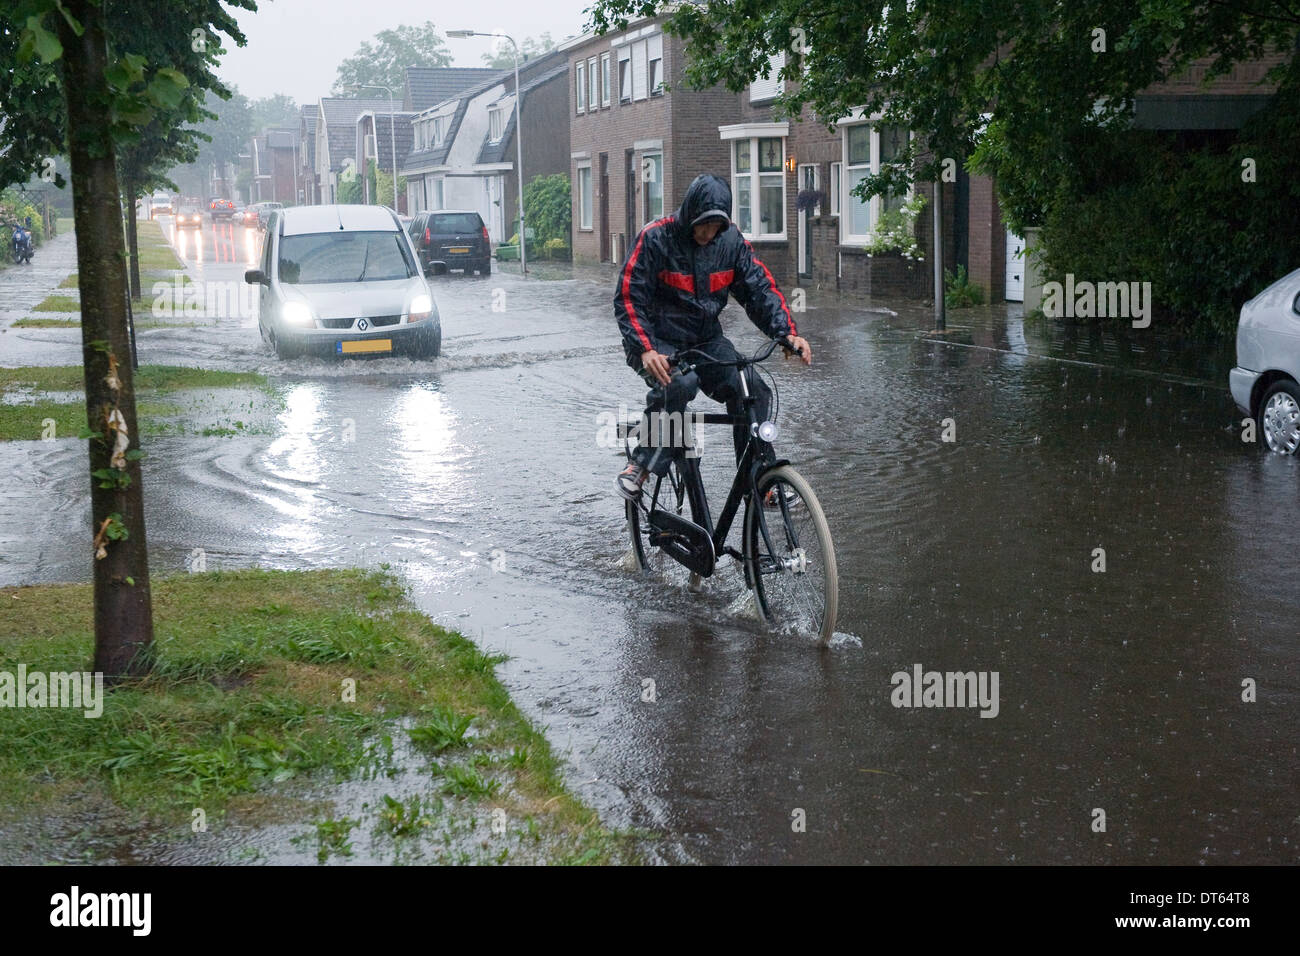 A man on a bicycle is riding through the water after a downpour Stock Photo